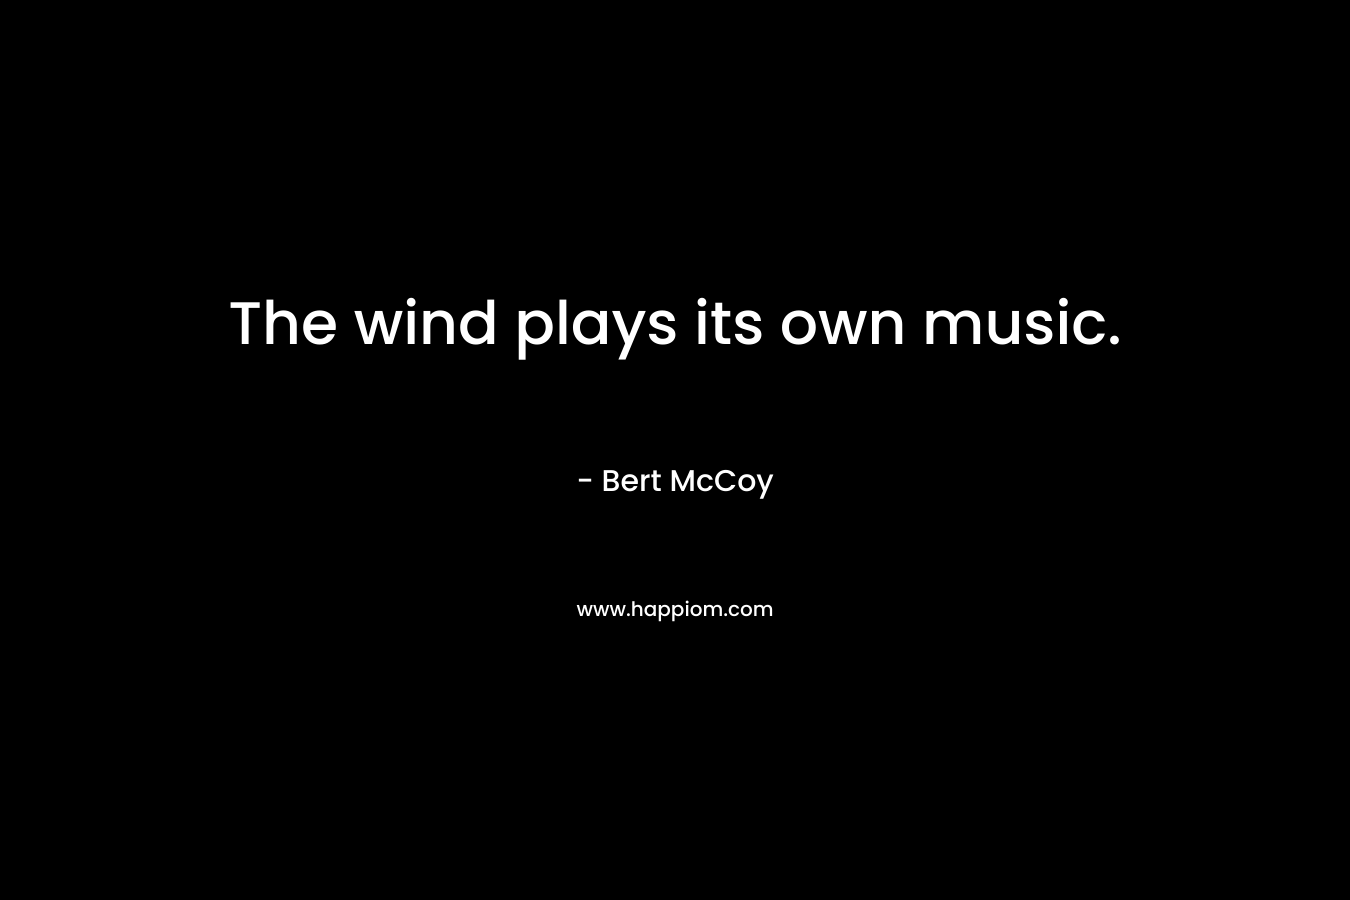 The wind plays its own music.